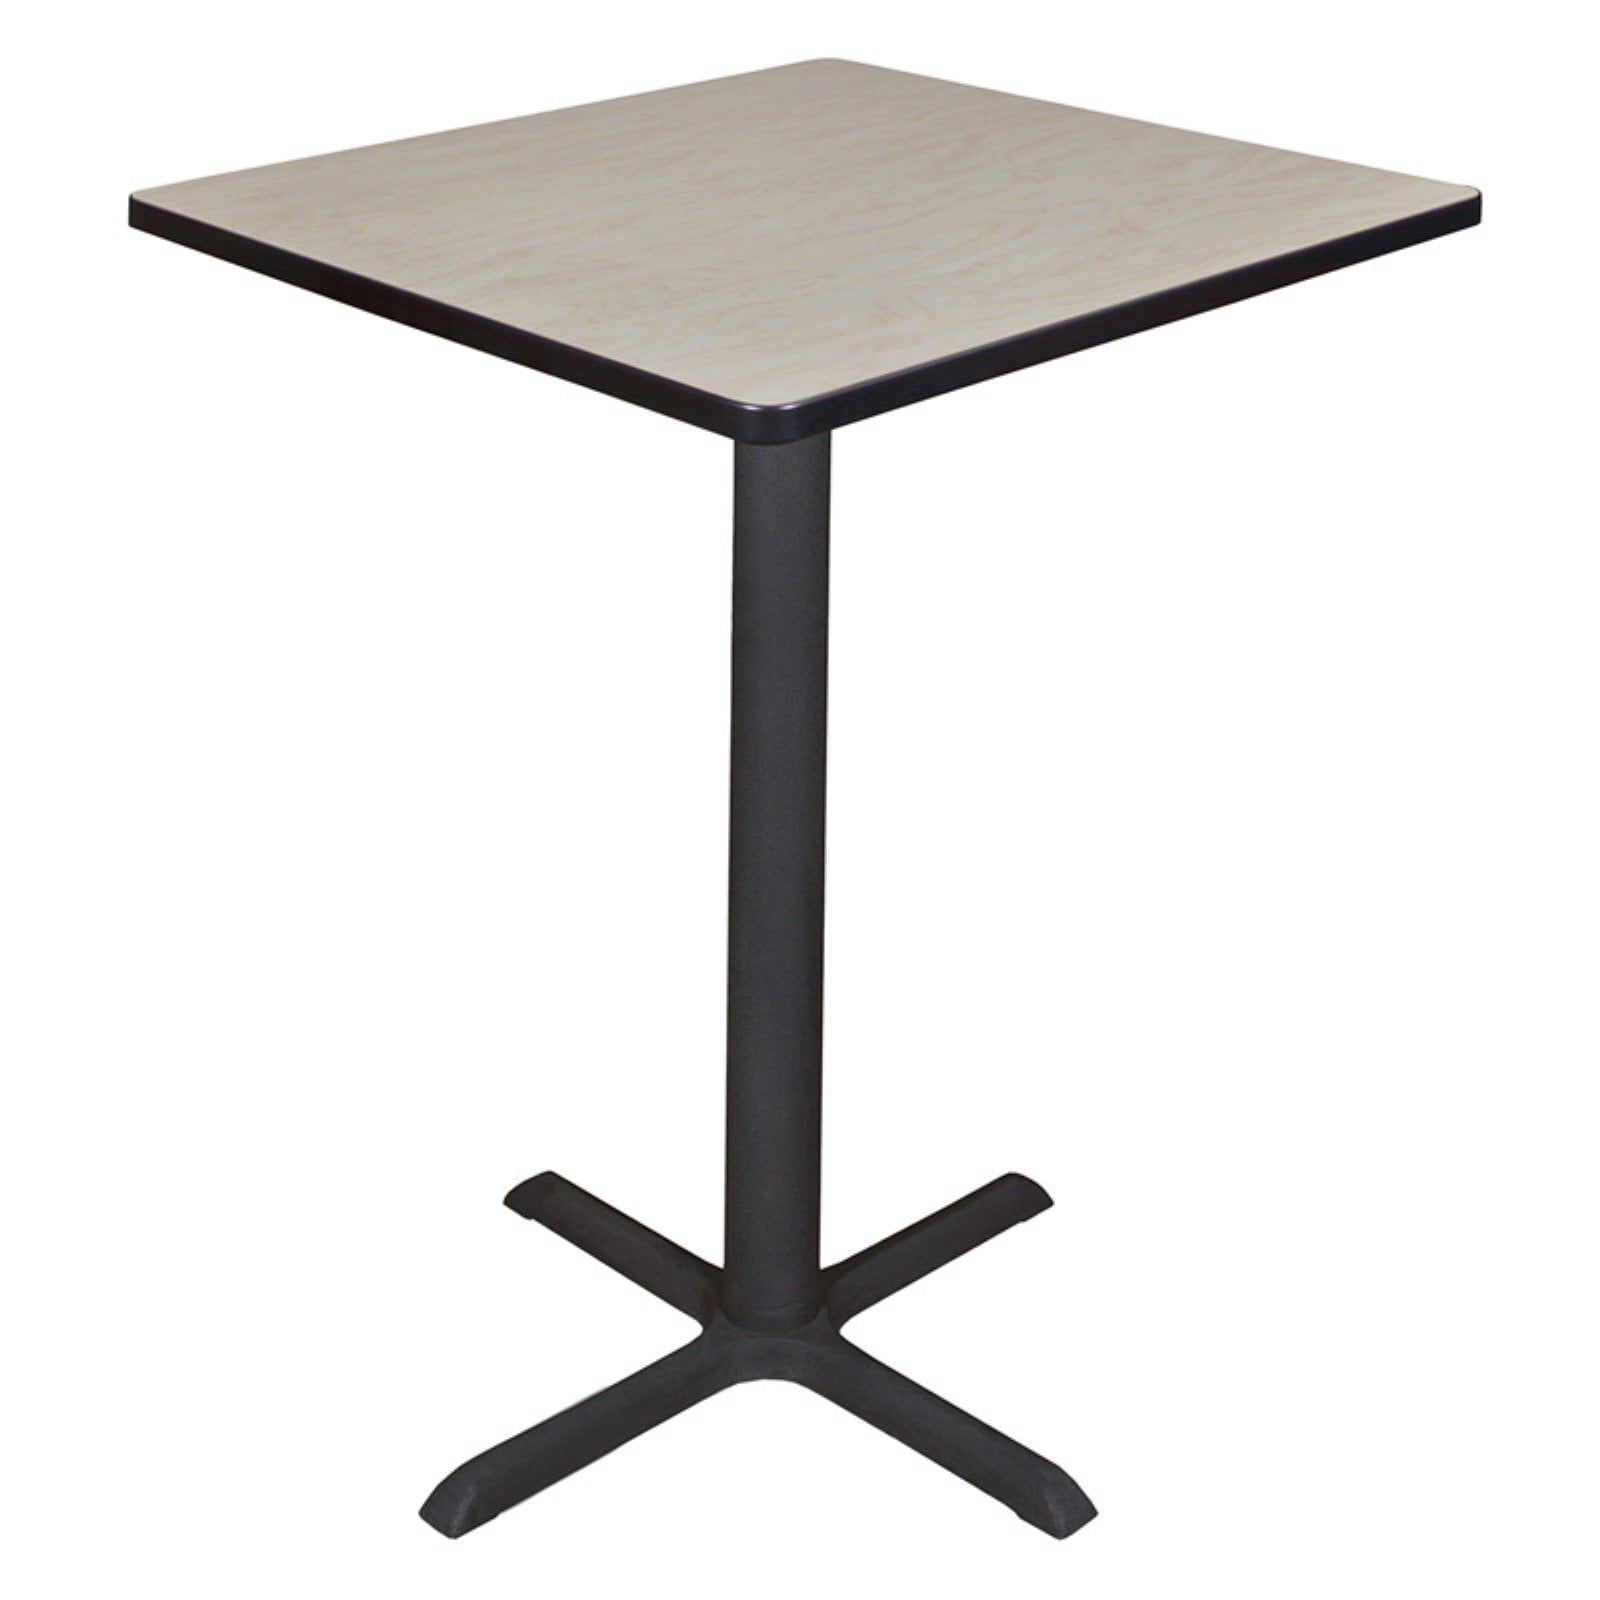 Regency Cain Square Cafe Table – Walmart Pertaining To Regency Cain Steel Coffee Tables (View 2 of 20)